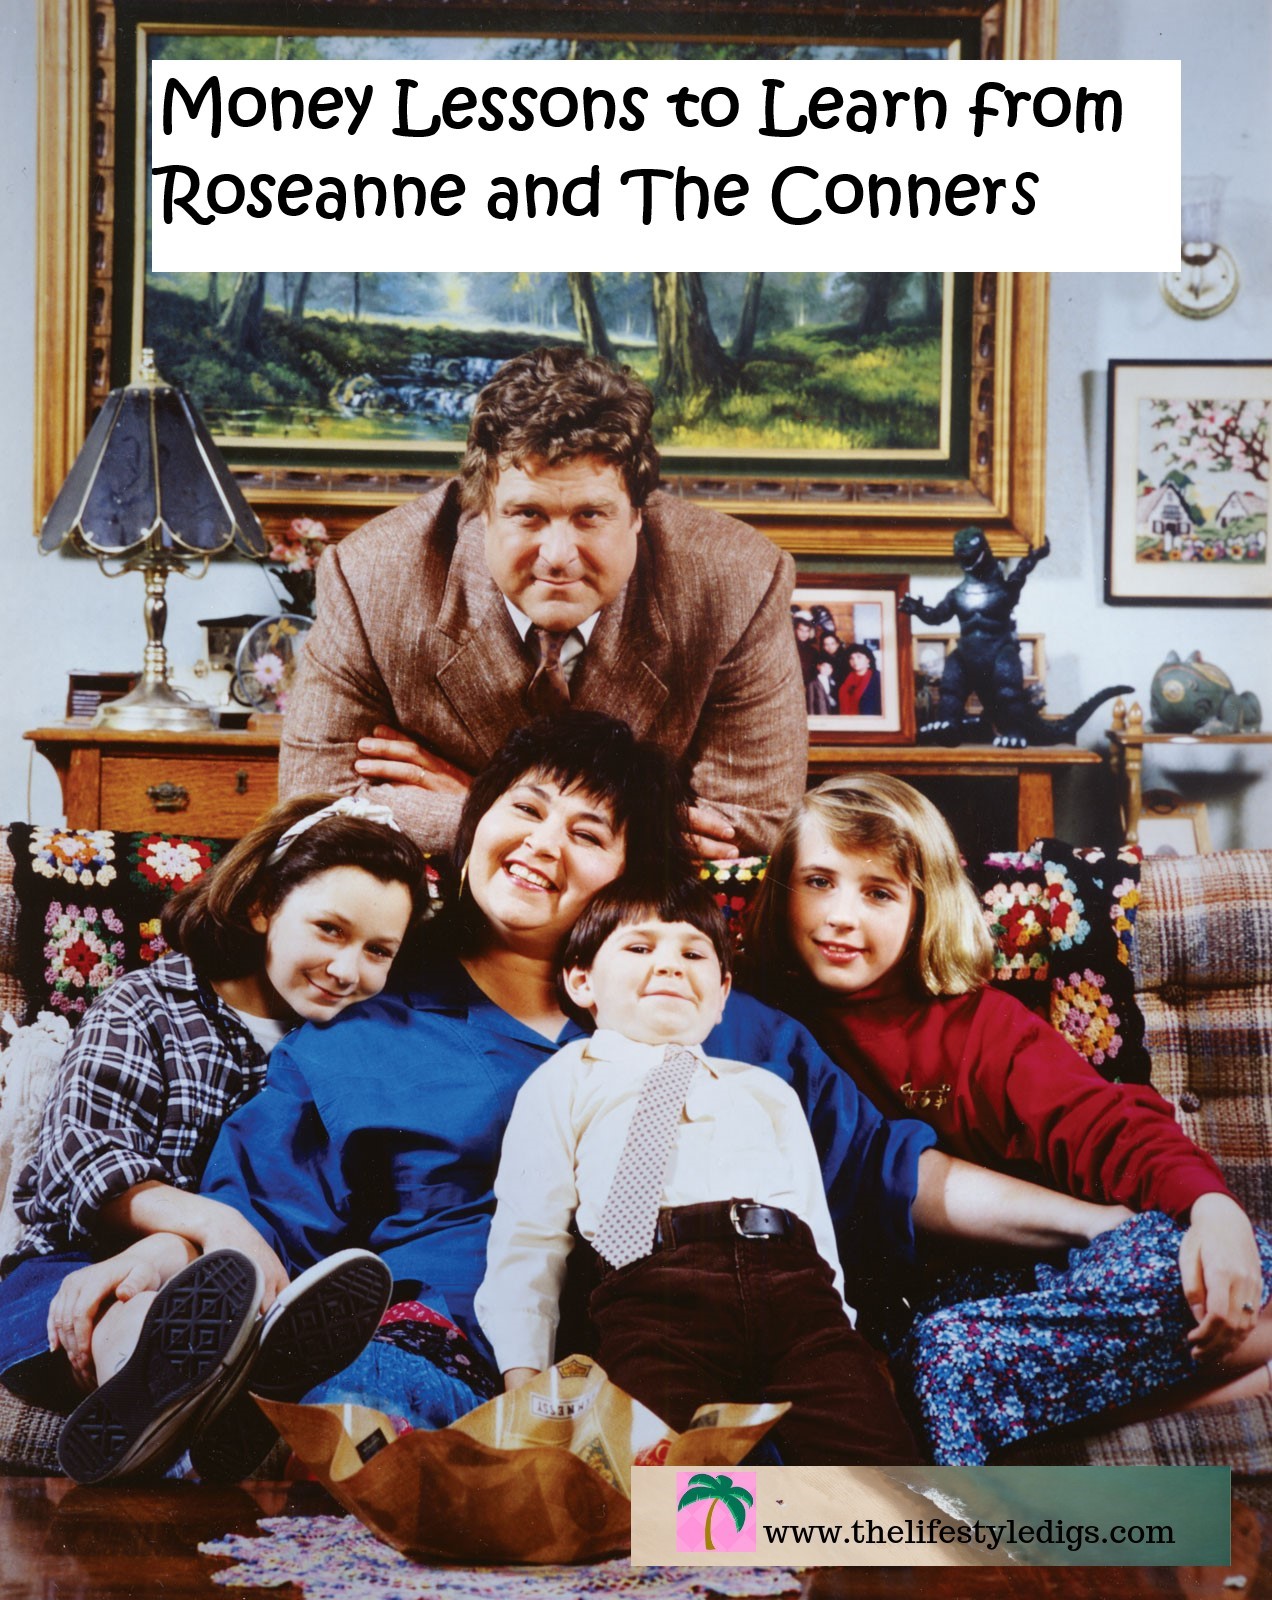 Money Lessons to Learn from Roseanne and The Conners